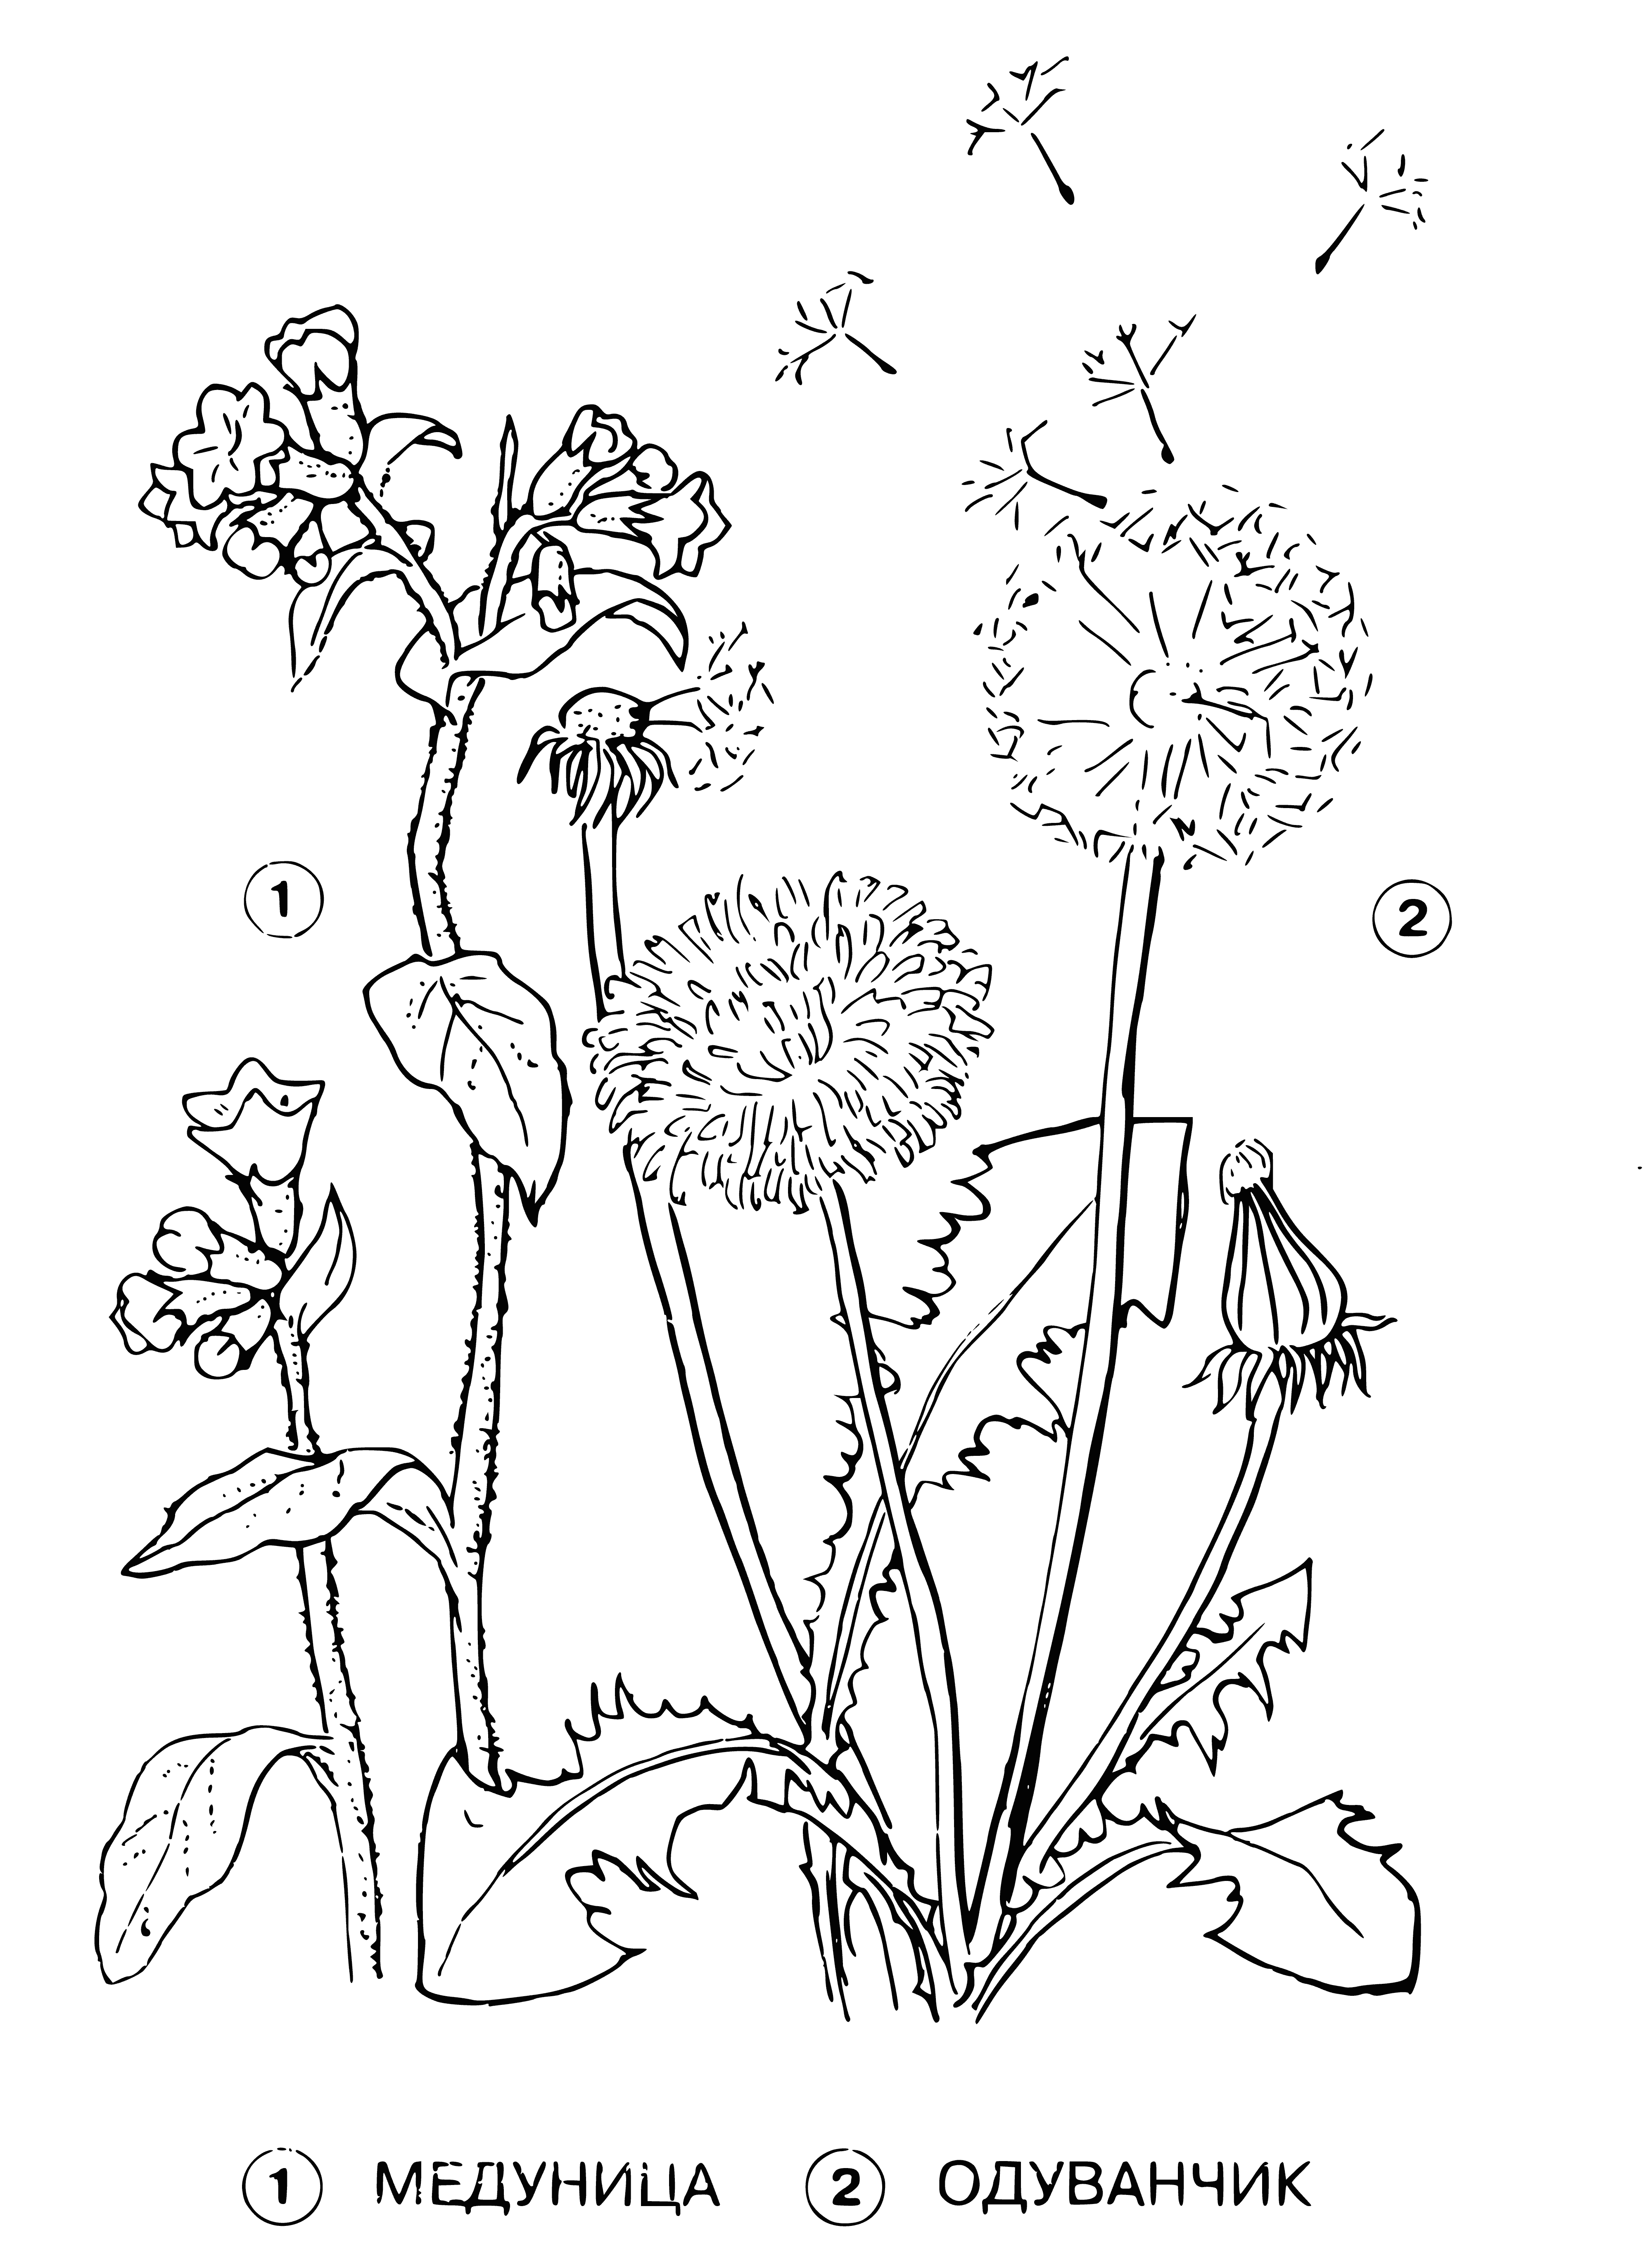 coloring page: Two flowers sit side-by-side: Lumpy w/pink, oval petals & Dandelion w/yellow, star-shaped petals.